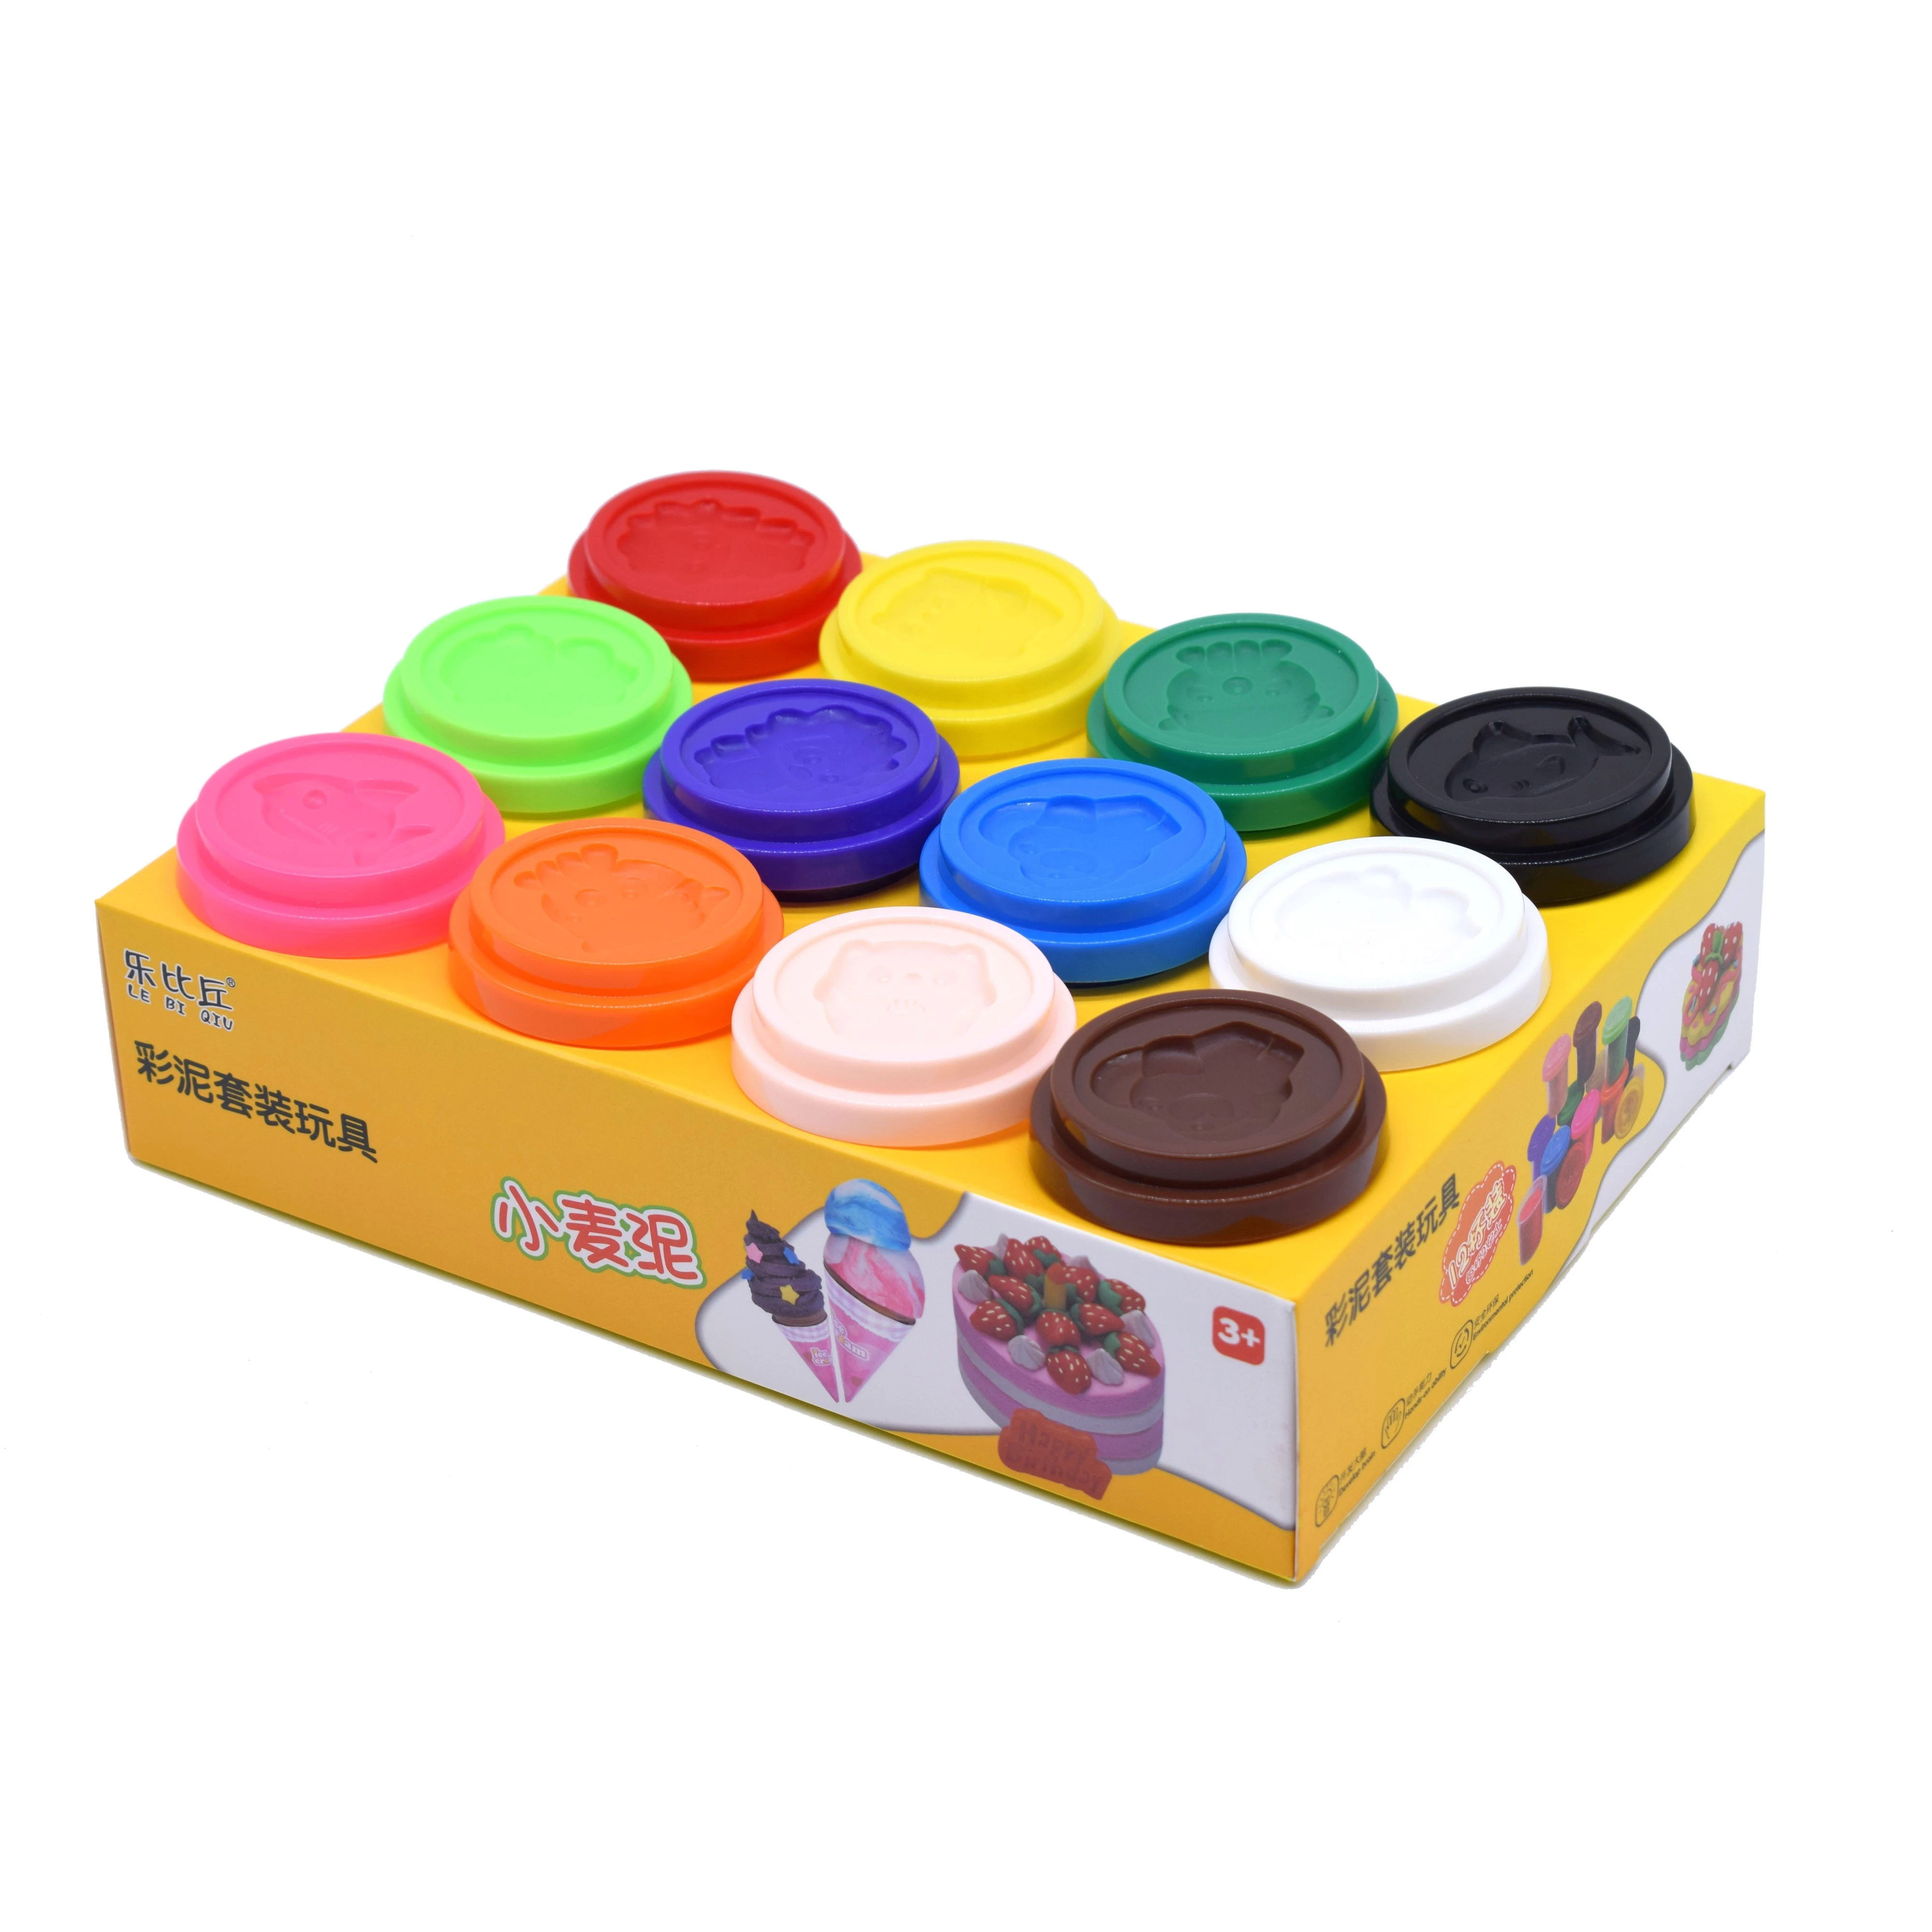 12 Colors Plasticine Modeling Clay in A Color Box Own Brand Playdough Diy Playdough